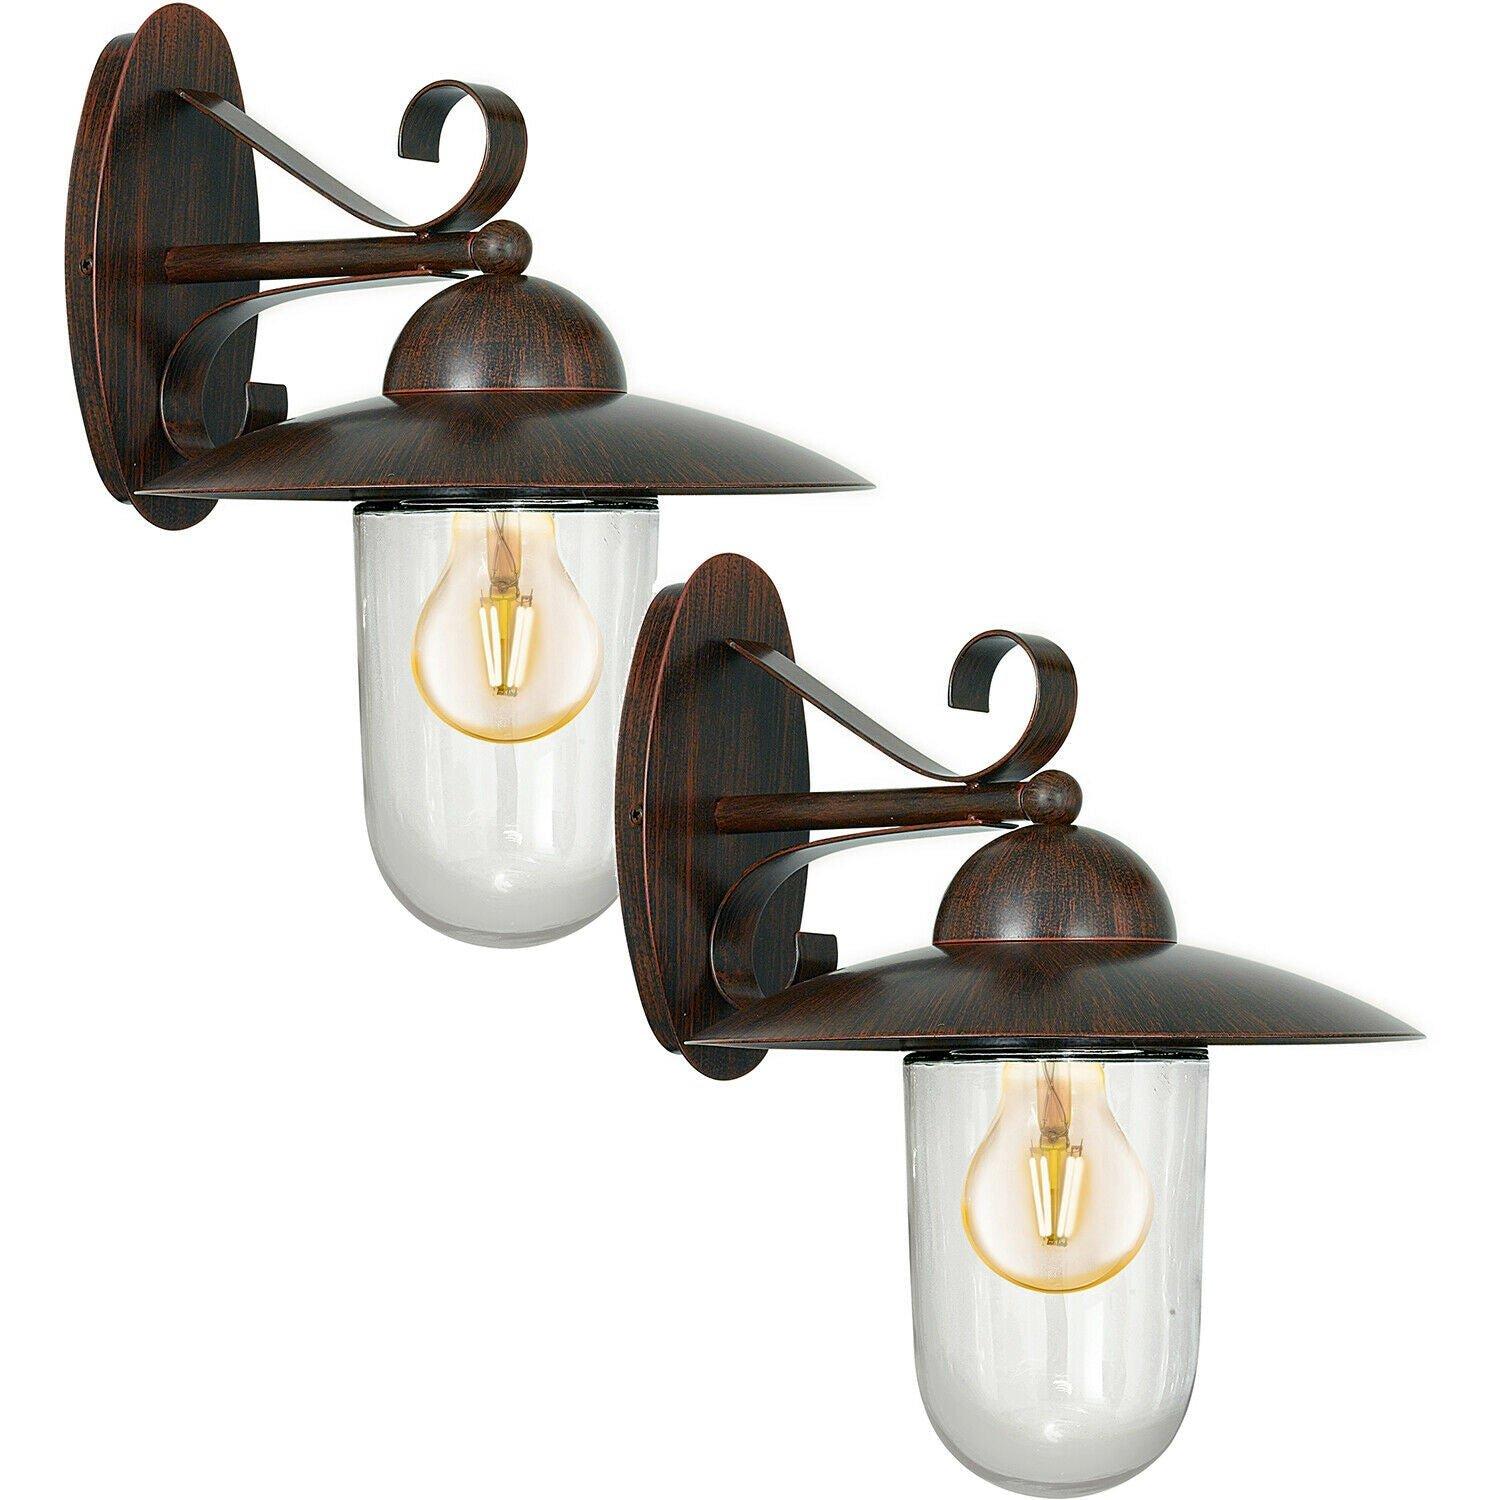 2 PACK IP44 Outdoor Wall Light Antique Brown Steel Fisherman Lamp 1x 60W E27